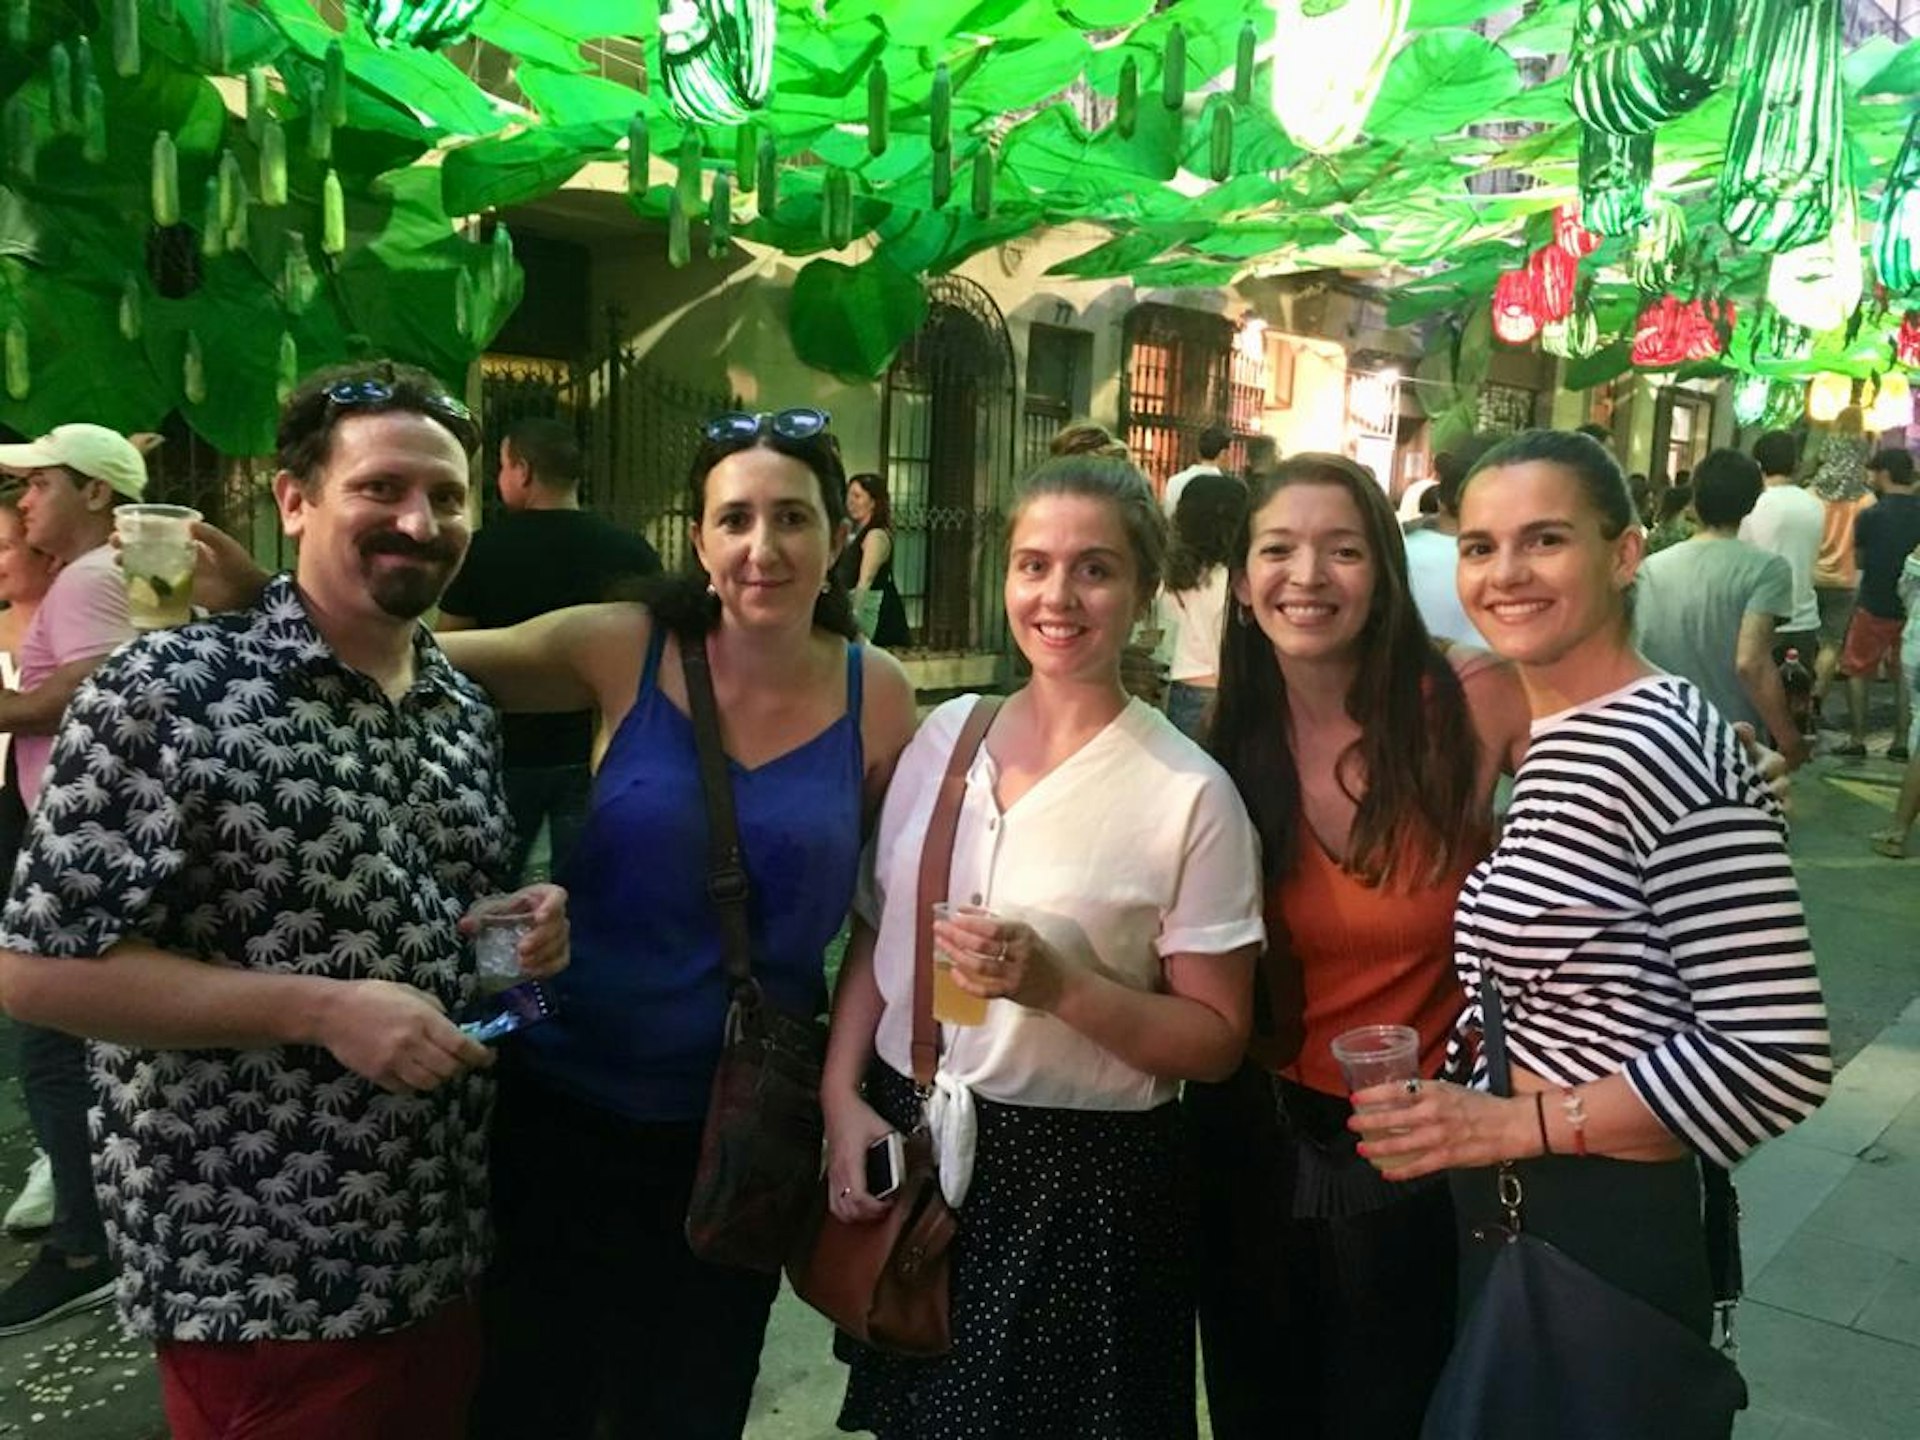 Writer Esme and four friends pose for the camera in a Barcelona street with green decorations suspended from above.